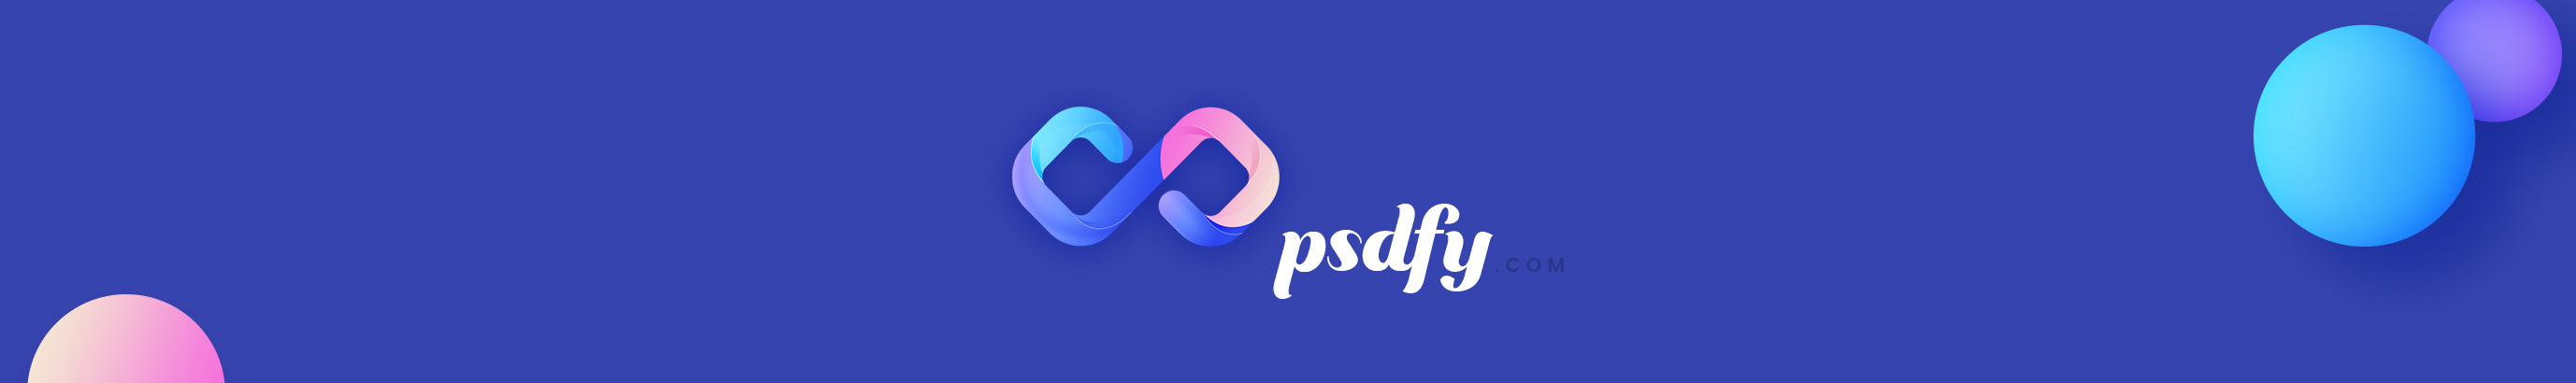 Psdfy Templates's profile banner